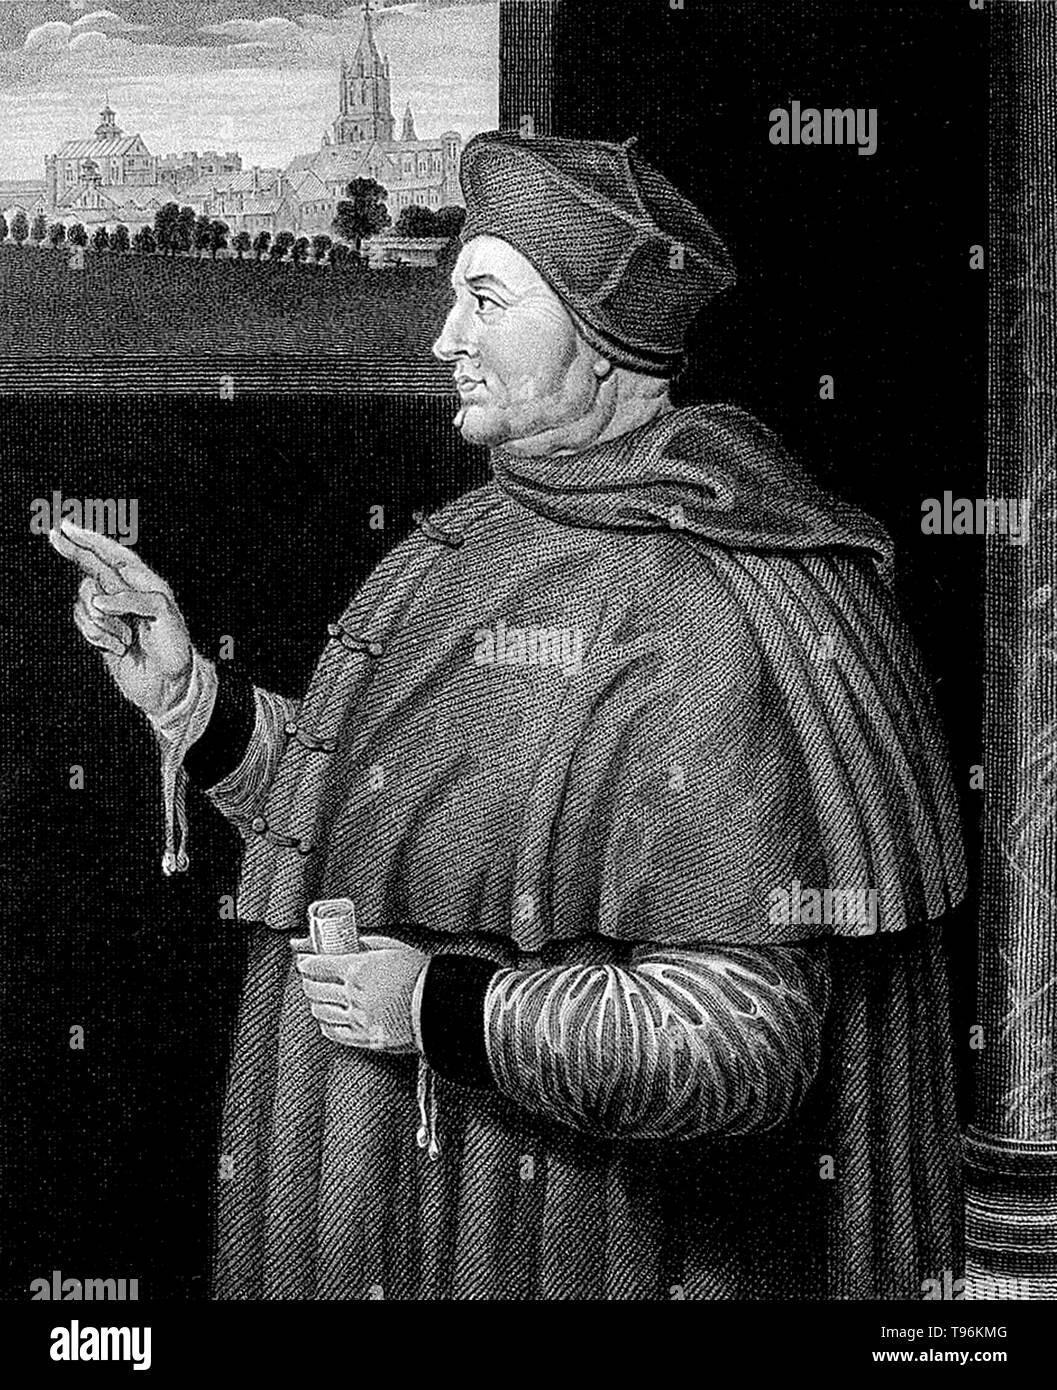 Thomas Wolsey (March 1473 - November 29, 1530) was an English churchman, statesman and a cardinal of the Catholic Church. When Henry VIII became King of England in 1509, Wolsey became the King's almoner. His affairs prospered, and by 1514 he was the controlling figure in virtually all matters of state and was extremely powerful within the Church. The highest political position he attained was Lord Chancellor, the King's chief adviser. Stock Photo